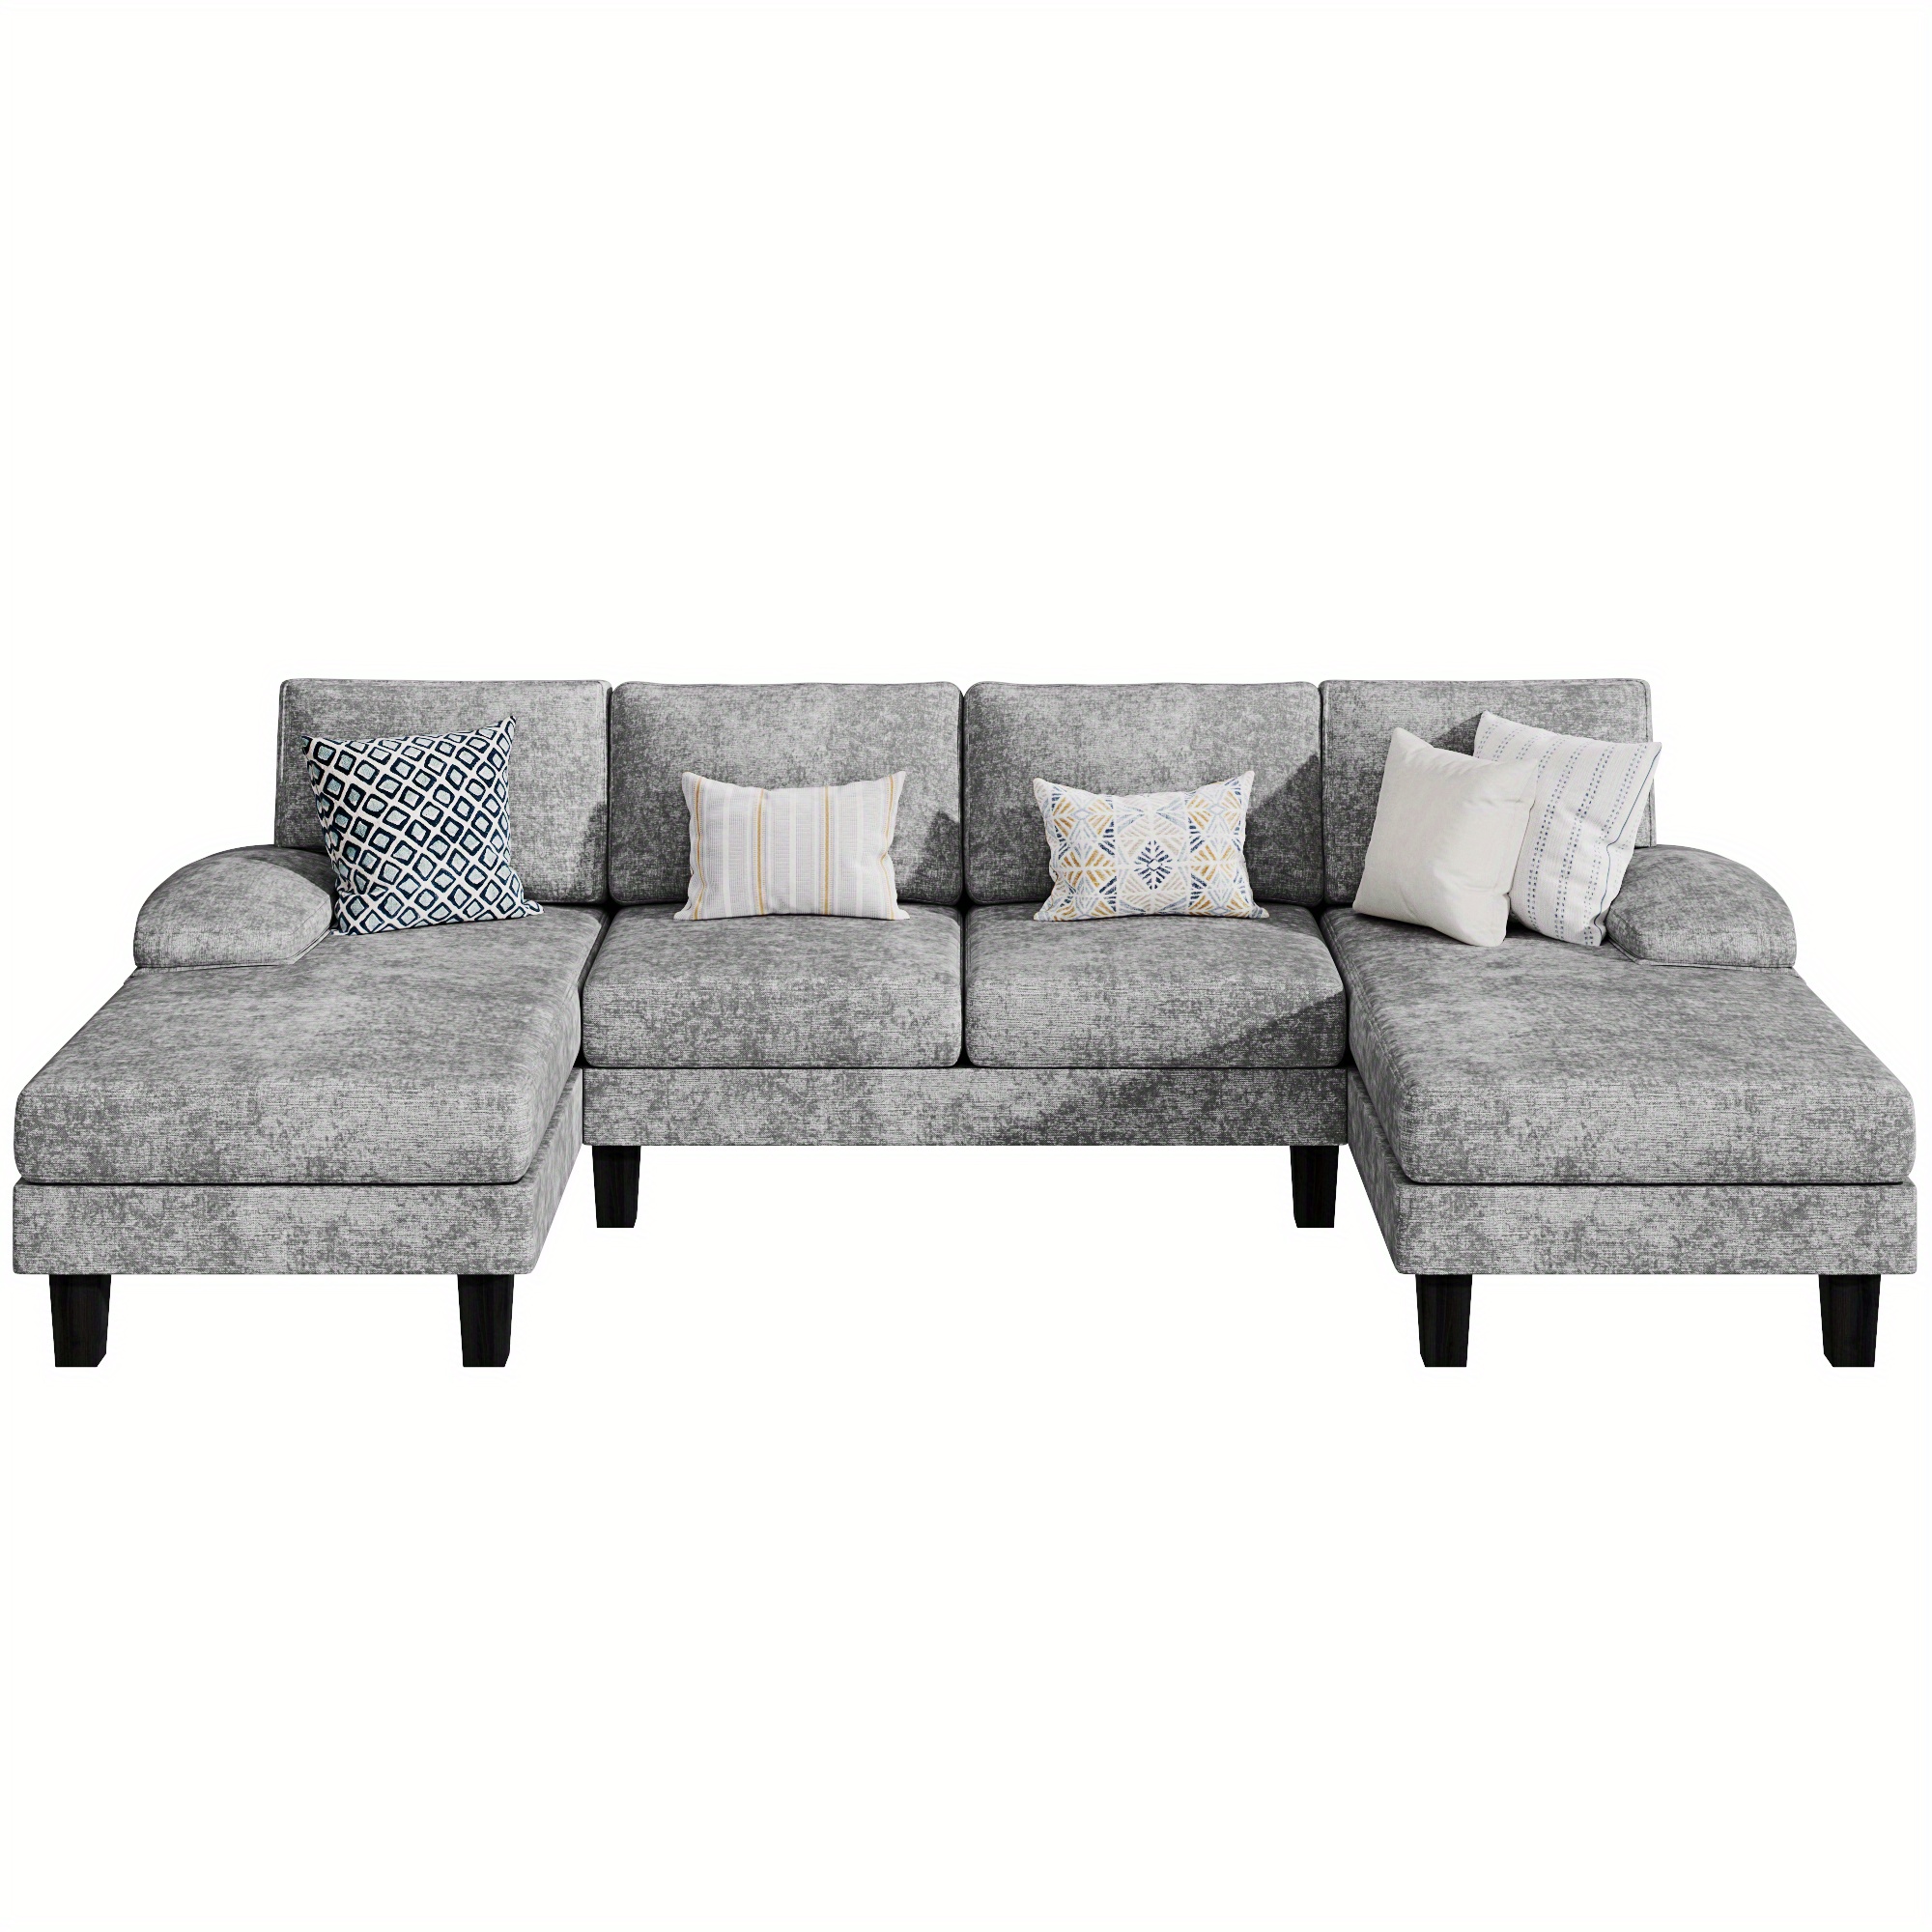 

Convertible Sectional Sofa Couch, Modern Fabric U-shaped Living Room Furniture Set, 4-seat Sectional Sleeper Sofa With Double Chaise & Memory Foam